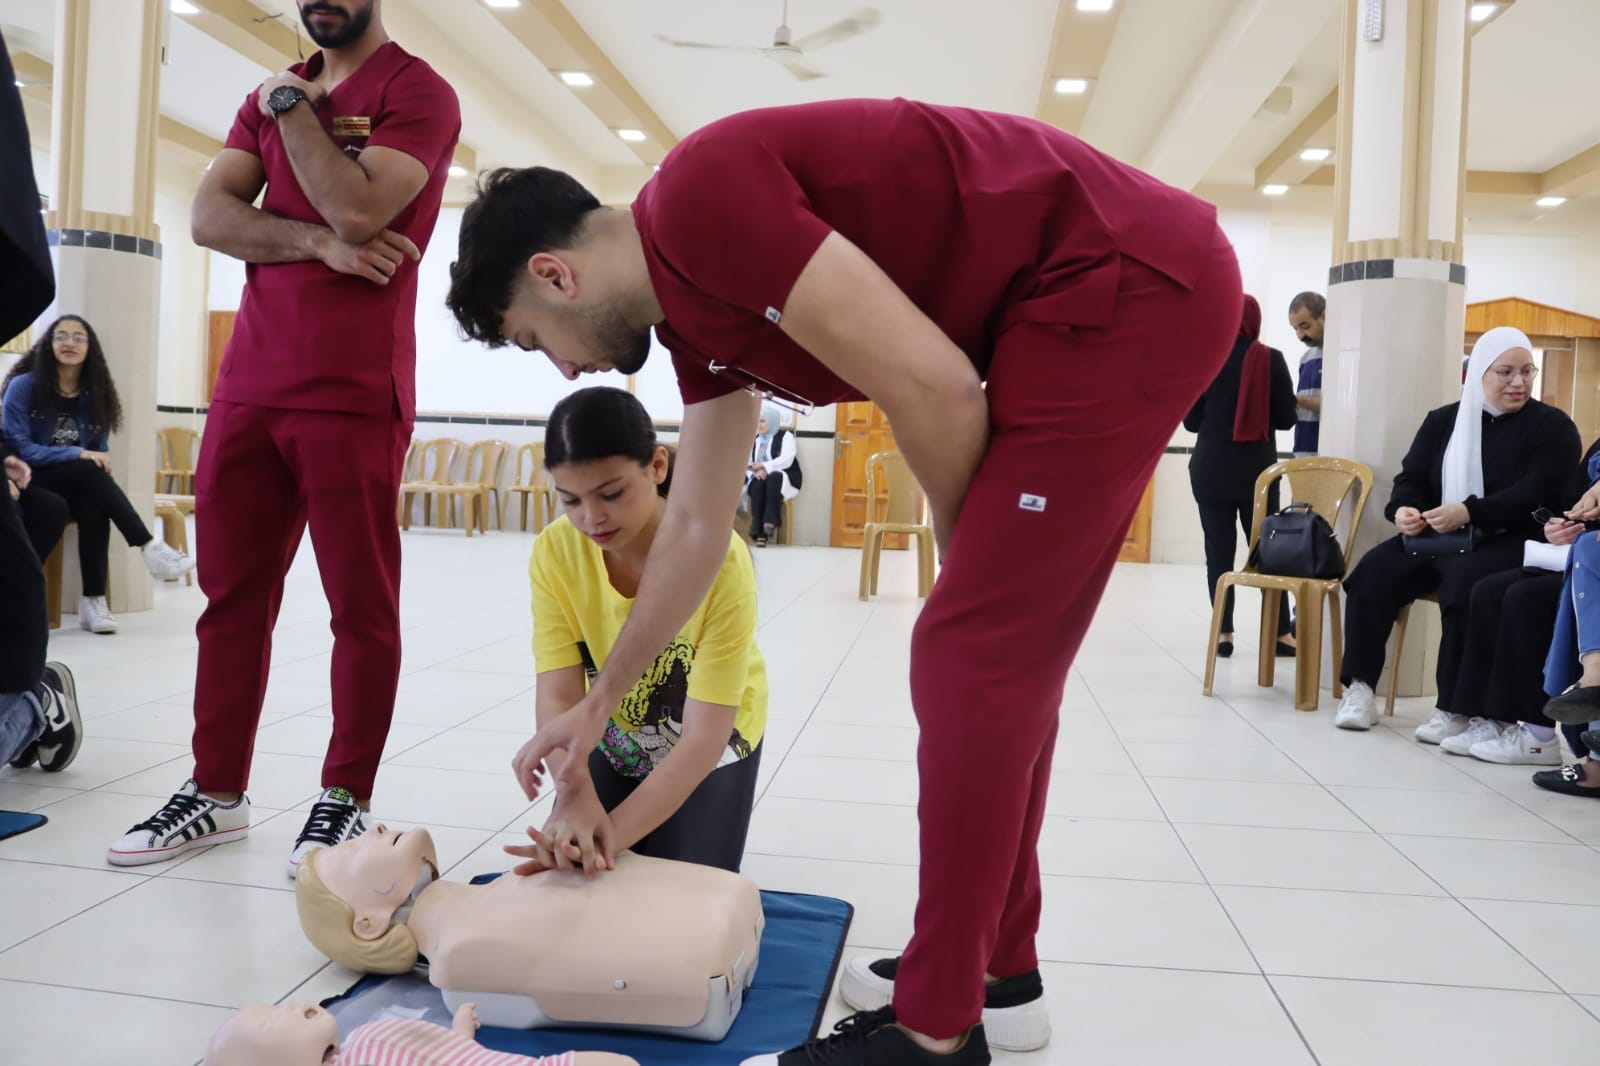 The Heart Center at the University Holds a Training Course Entitled: "Cardiopulmonary Resuscitation and Basic Life Support"